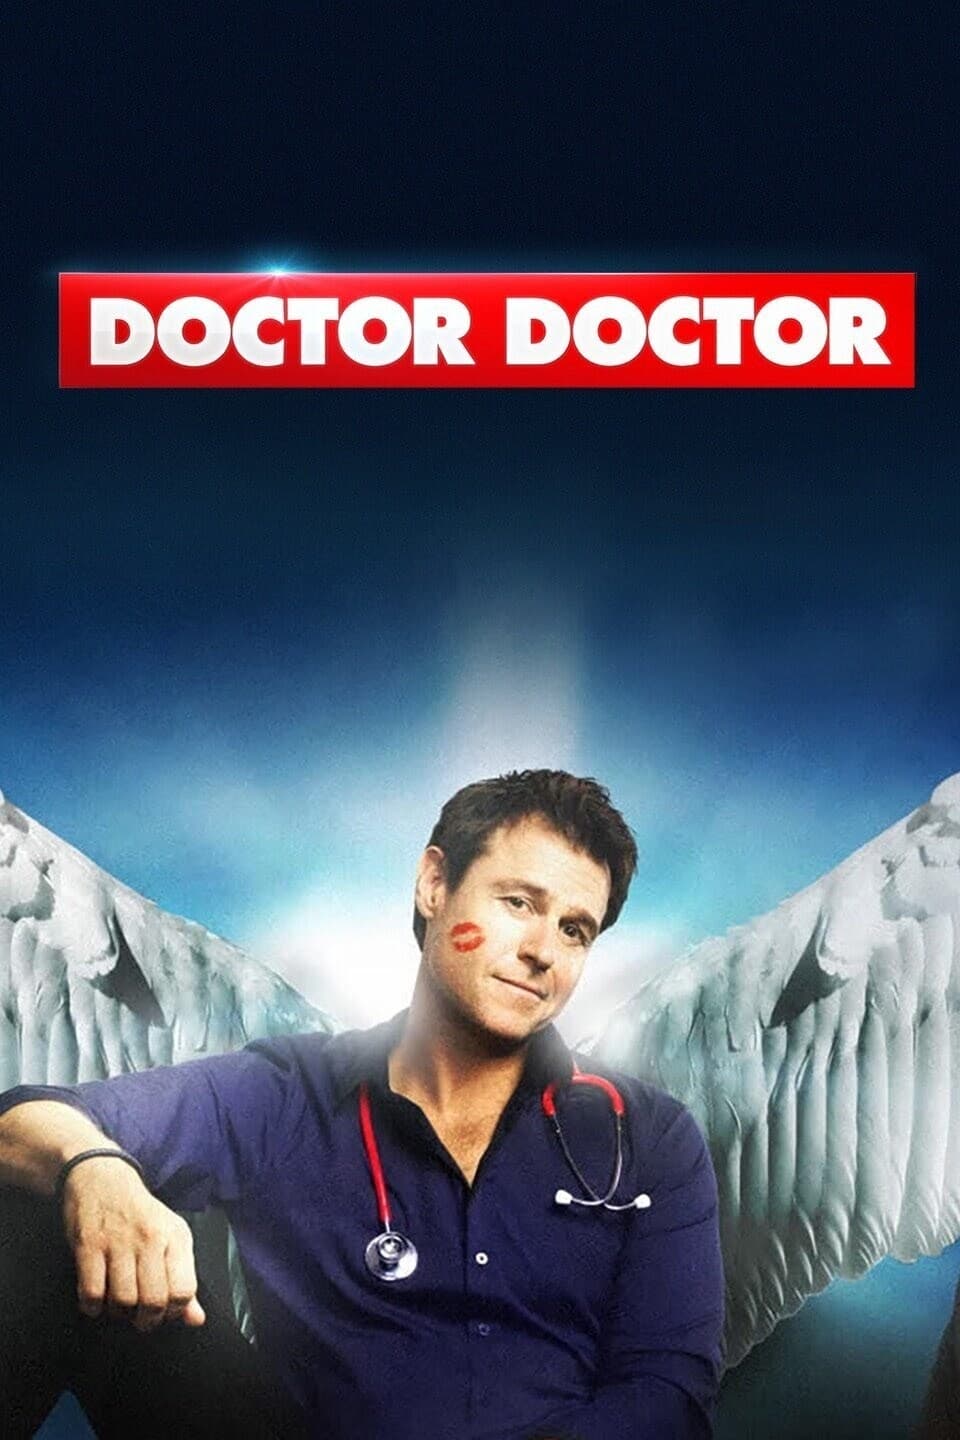 Doctor Doctor TV Shows About Small Town